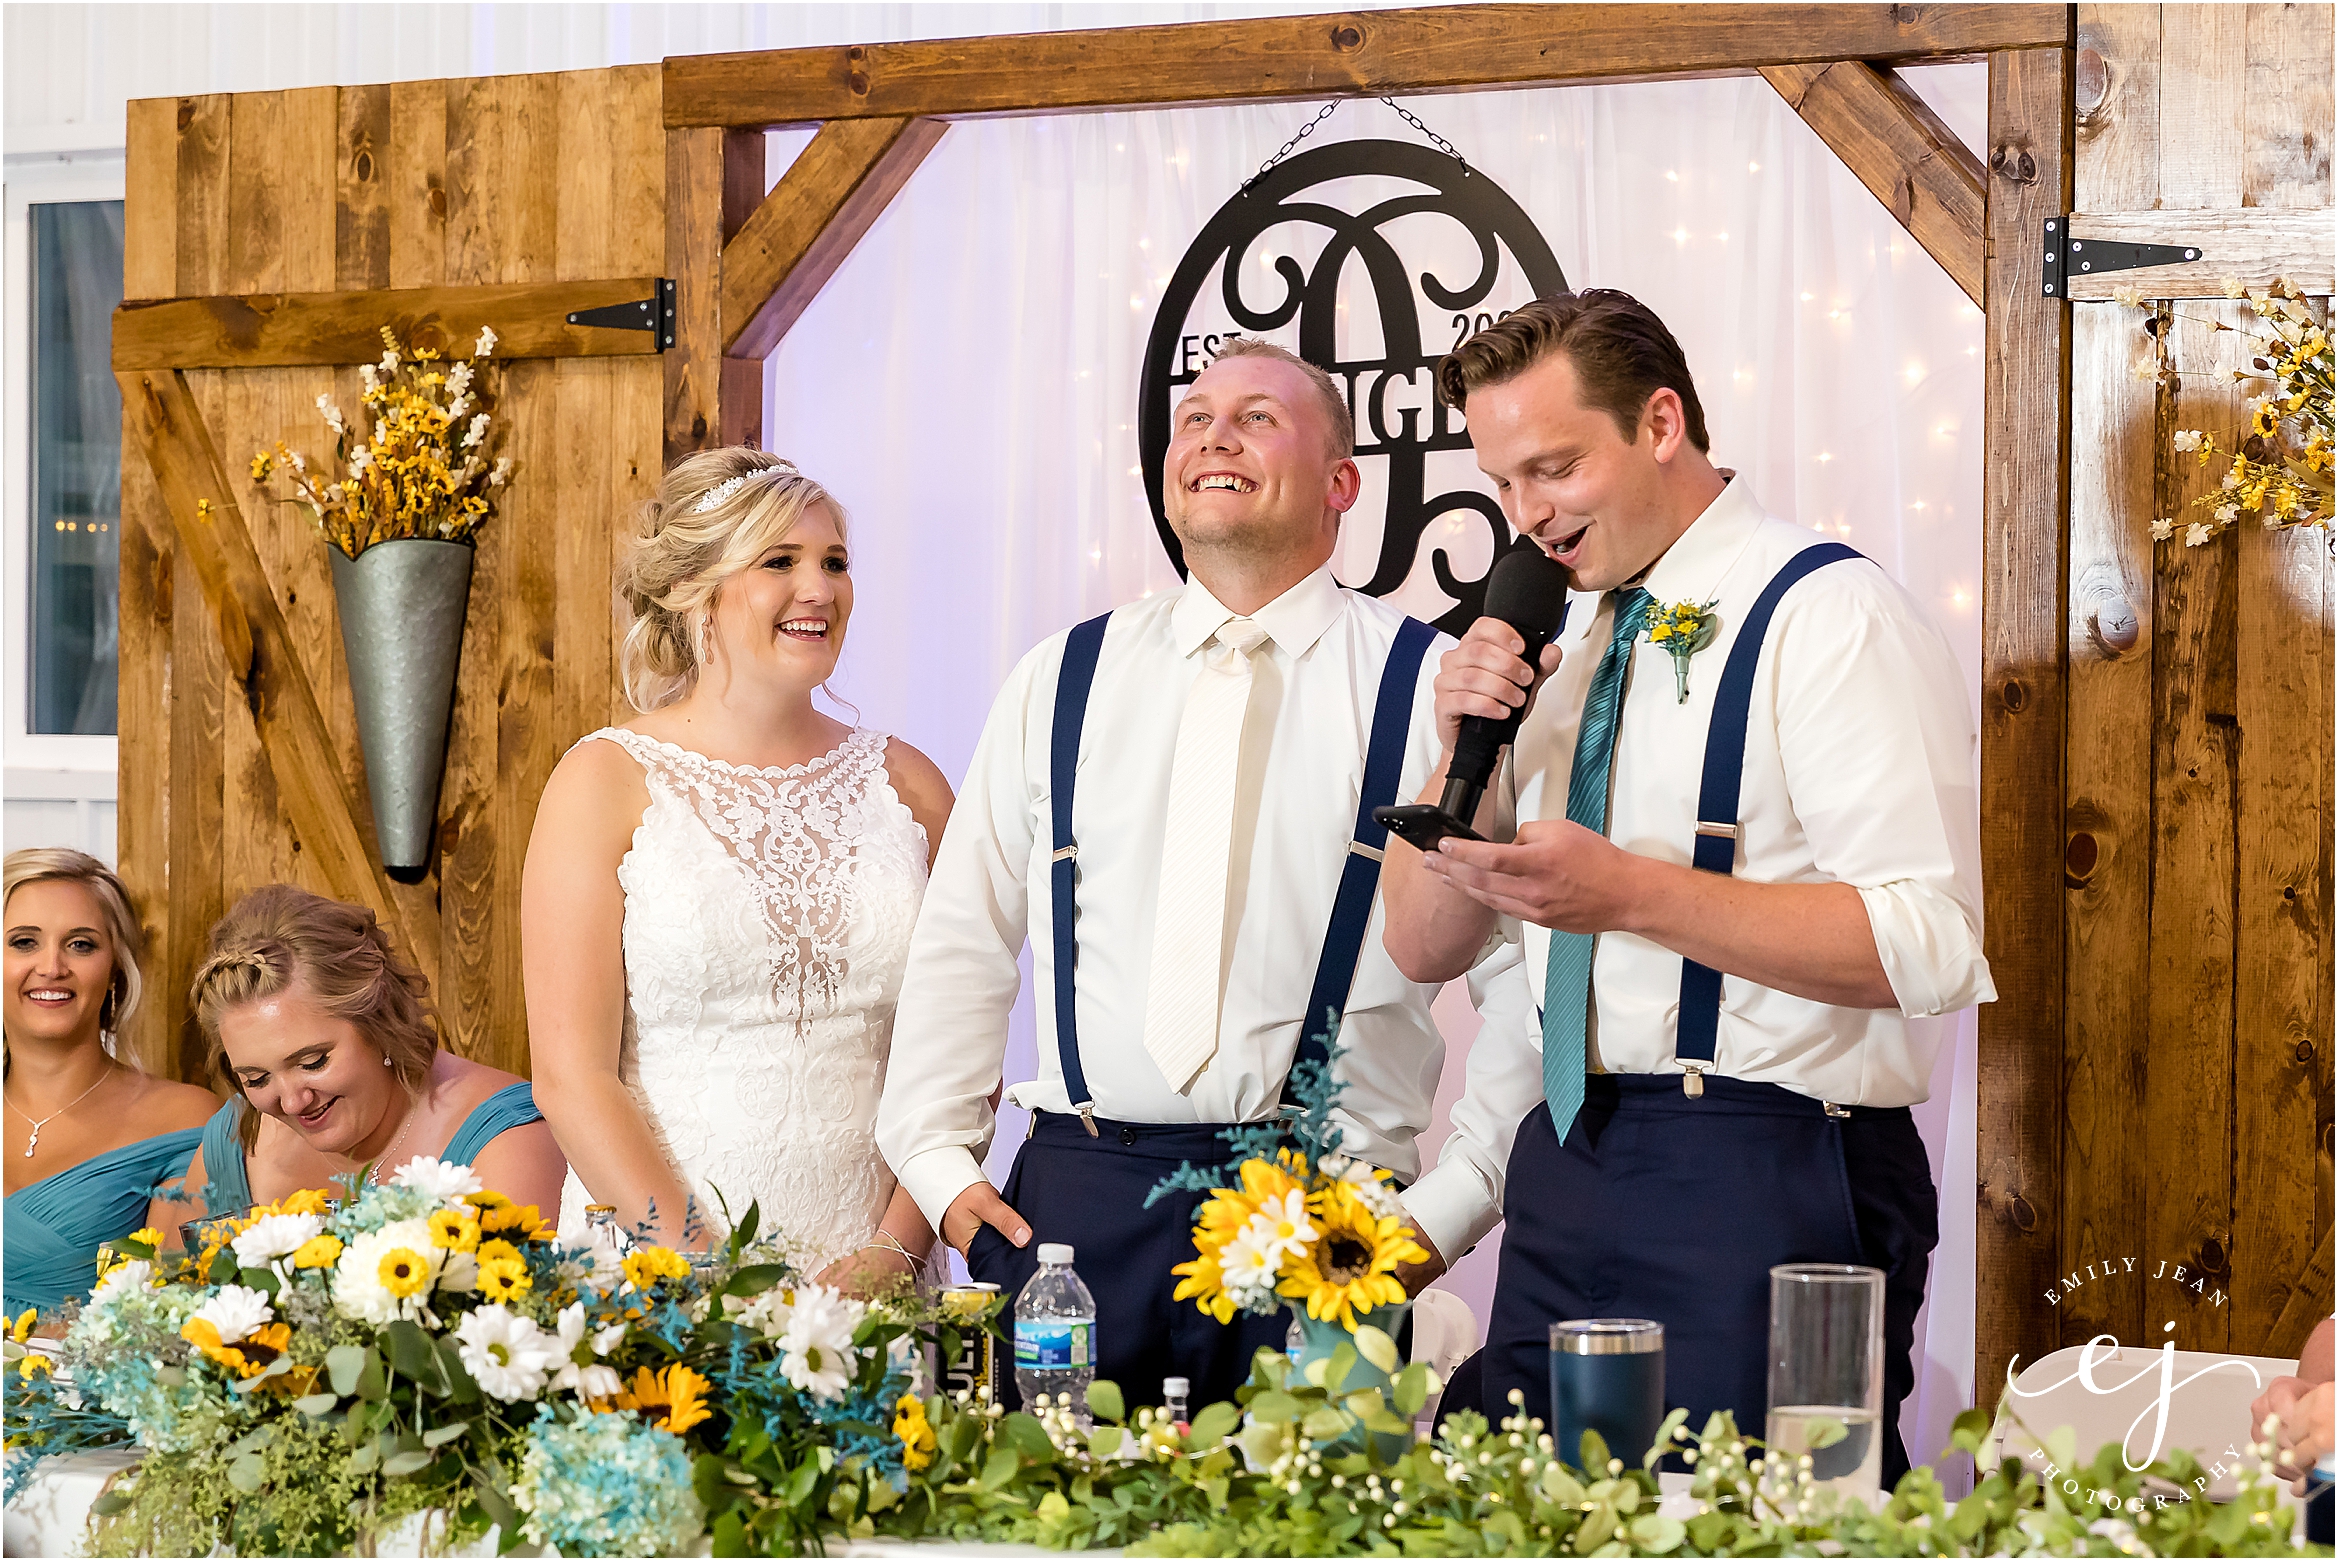 best man speech with white twinkle light backdrop at head table